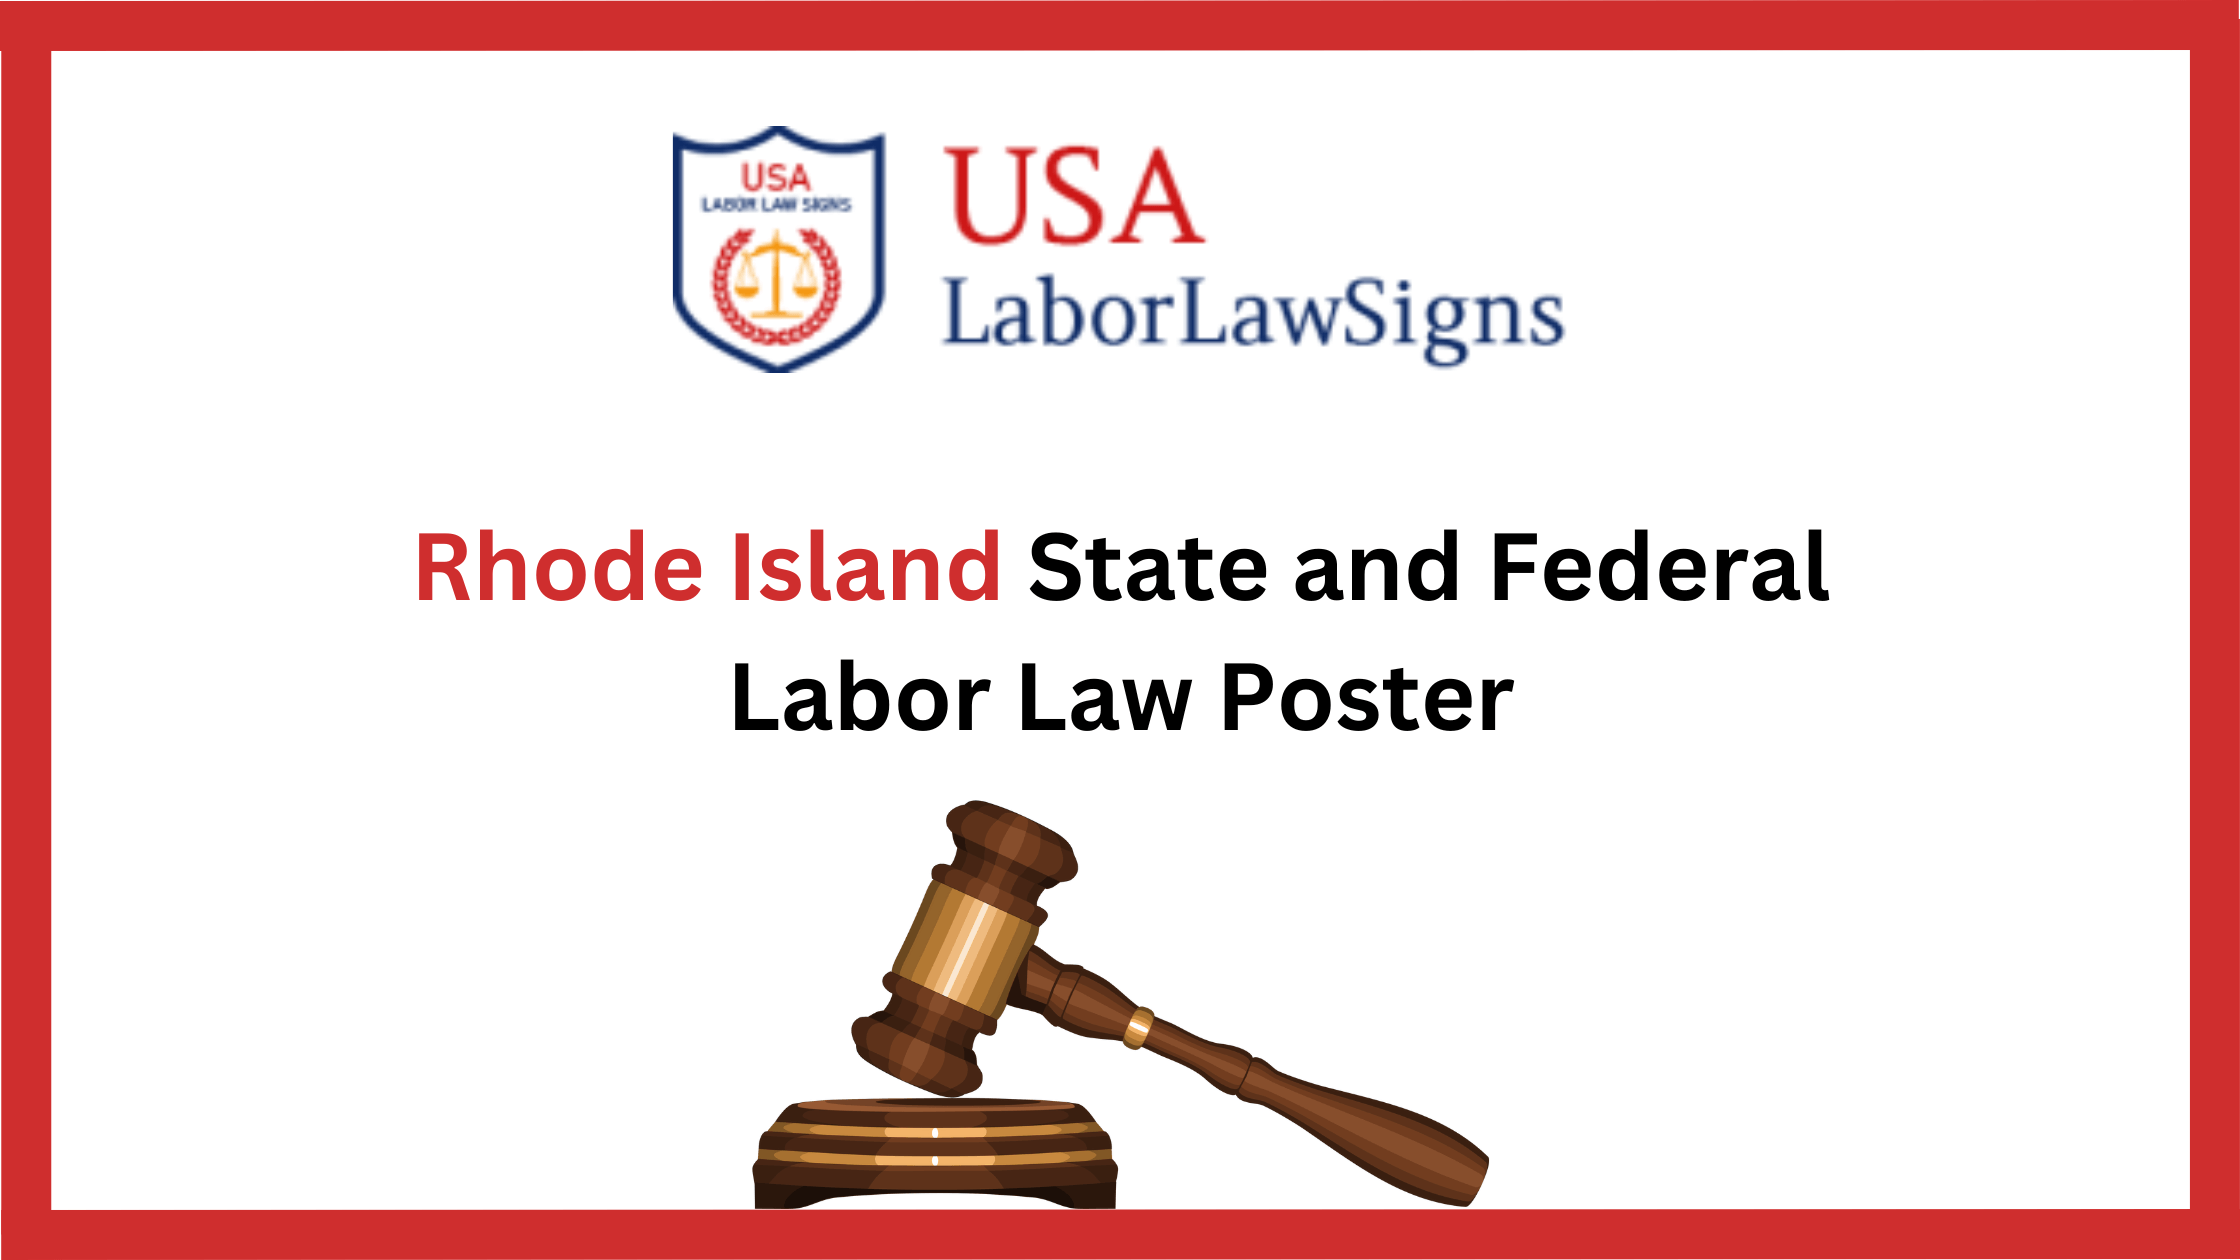 Rhode Island Labor Law Poster: Key Elements and Requirements